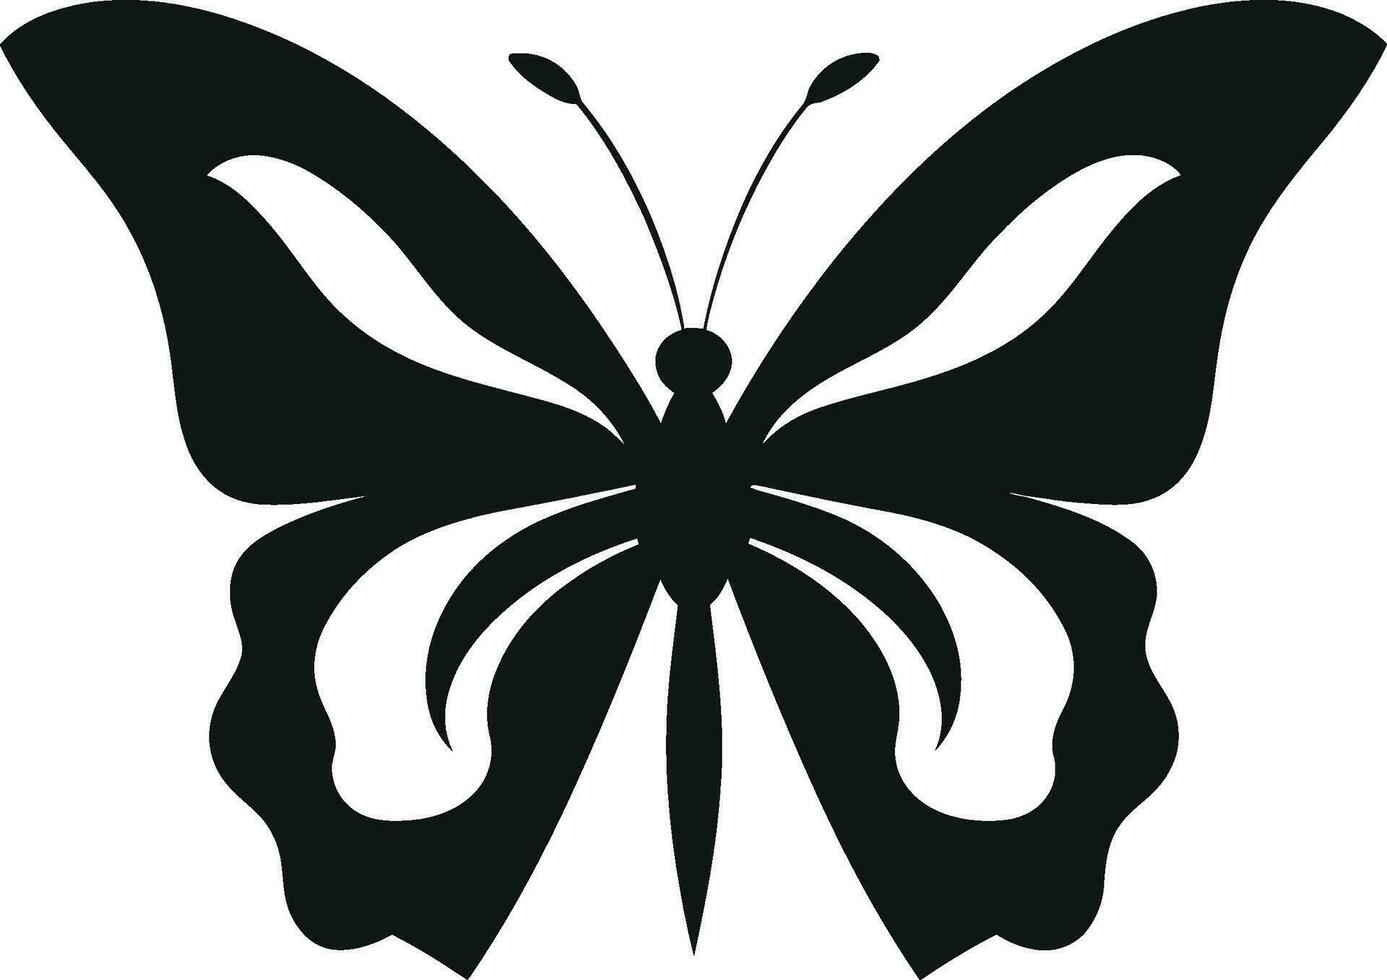 Winged Delight Black Butterfly Icon in Black Artistic Freedom Butterfly Mark in Noir vector